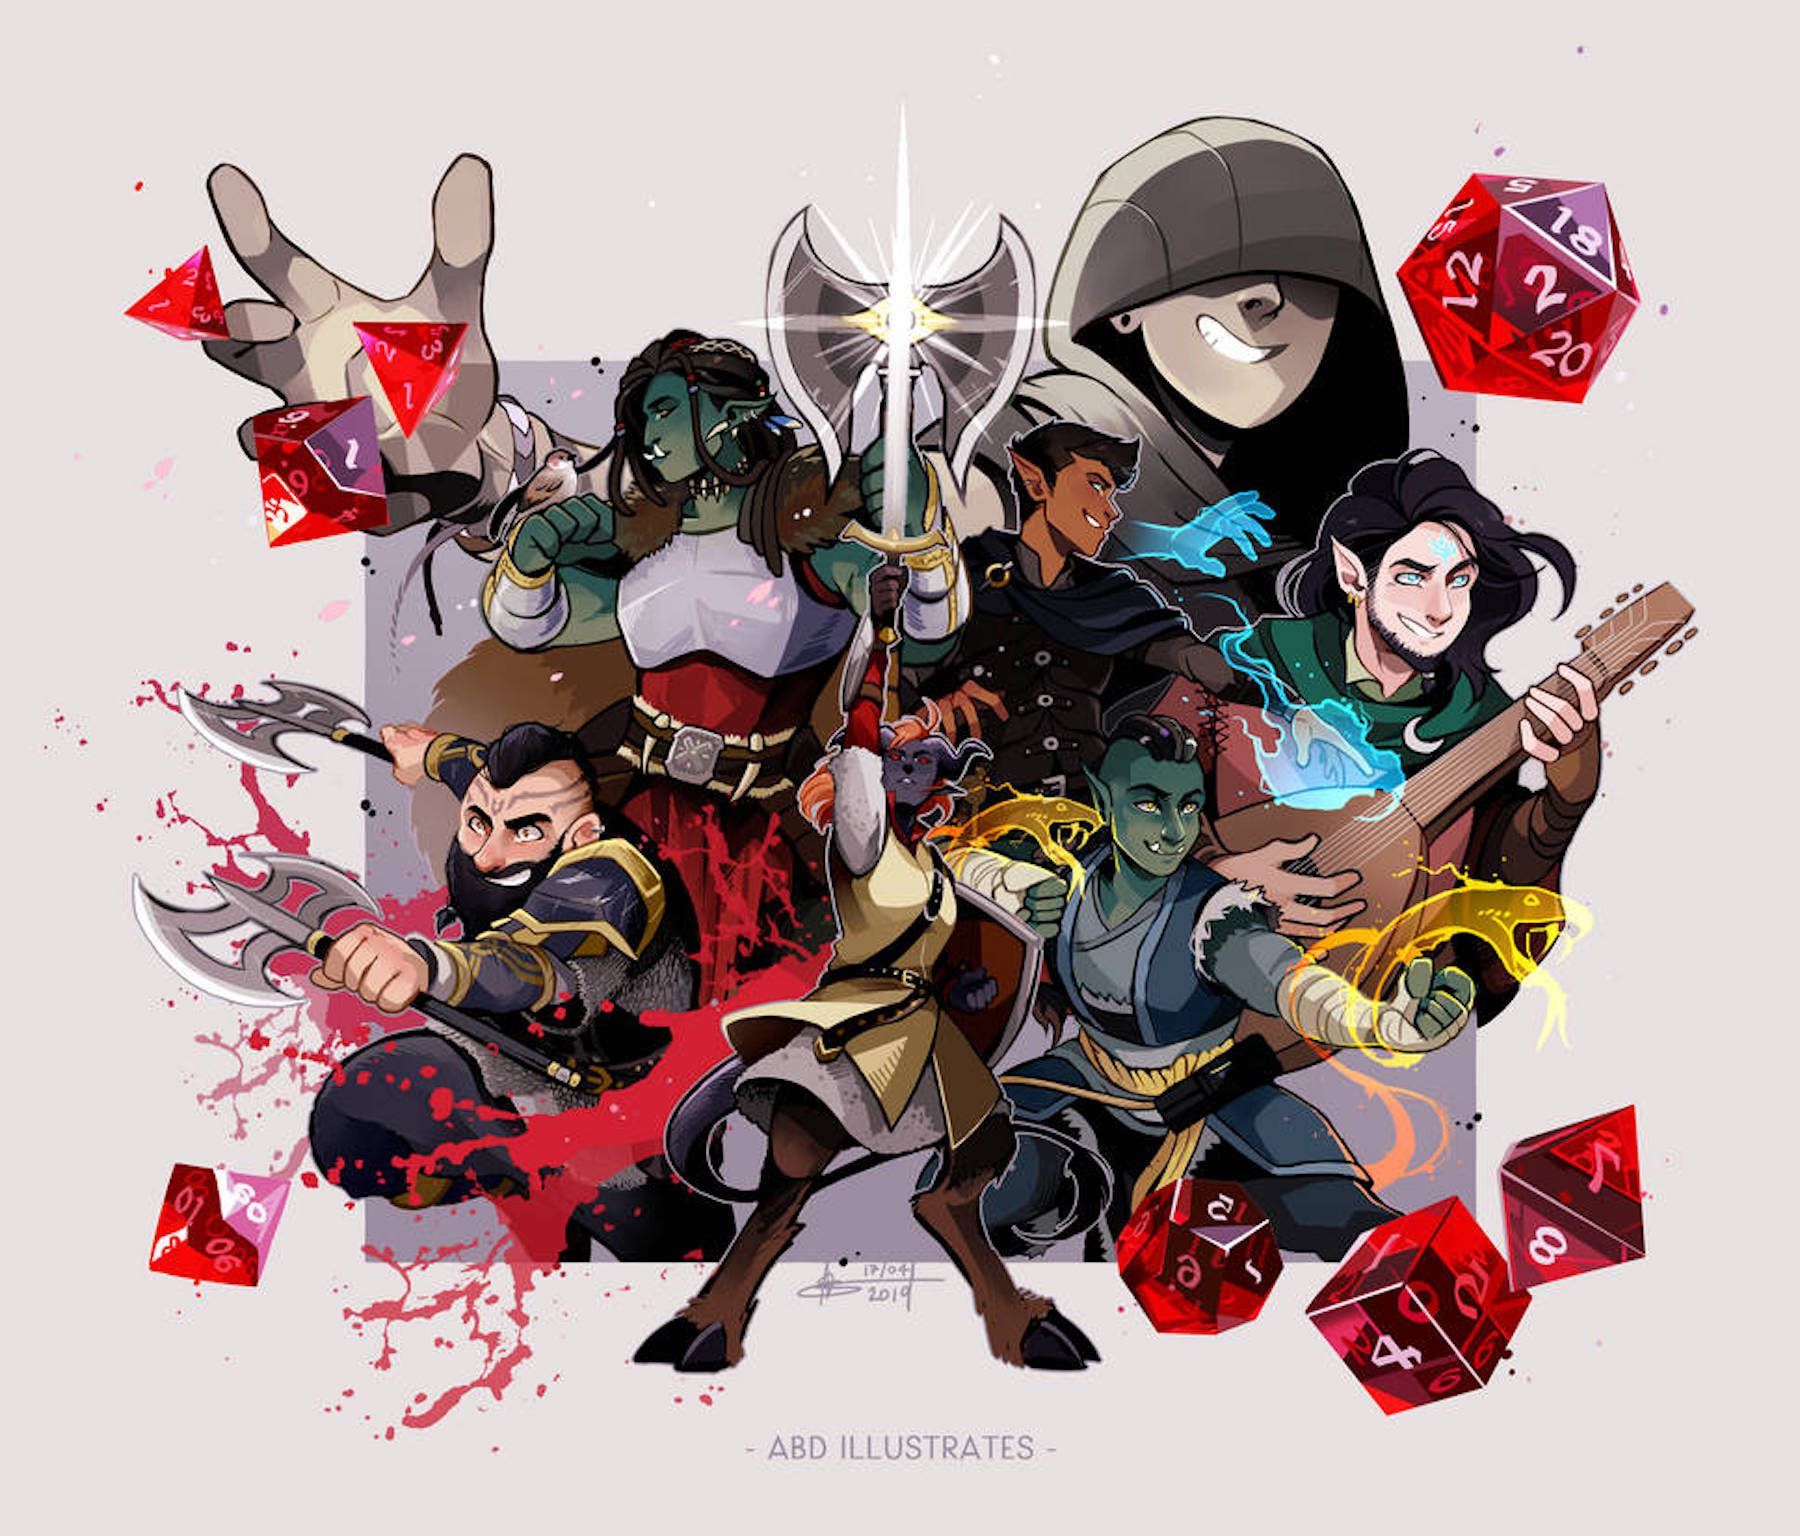 Cartoonish illustration of various races and classes of characters from the popular dungeons and dragons game surrounded by the dice used to play the game